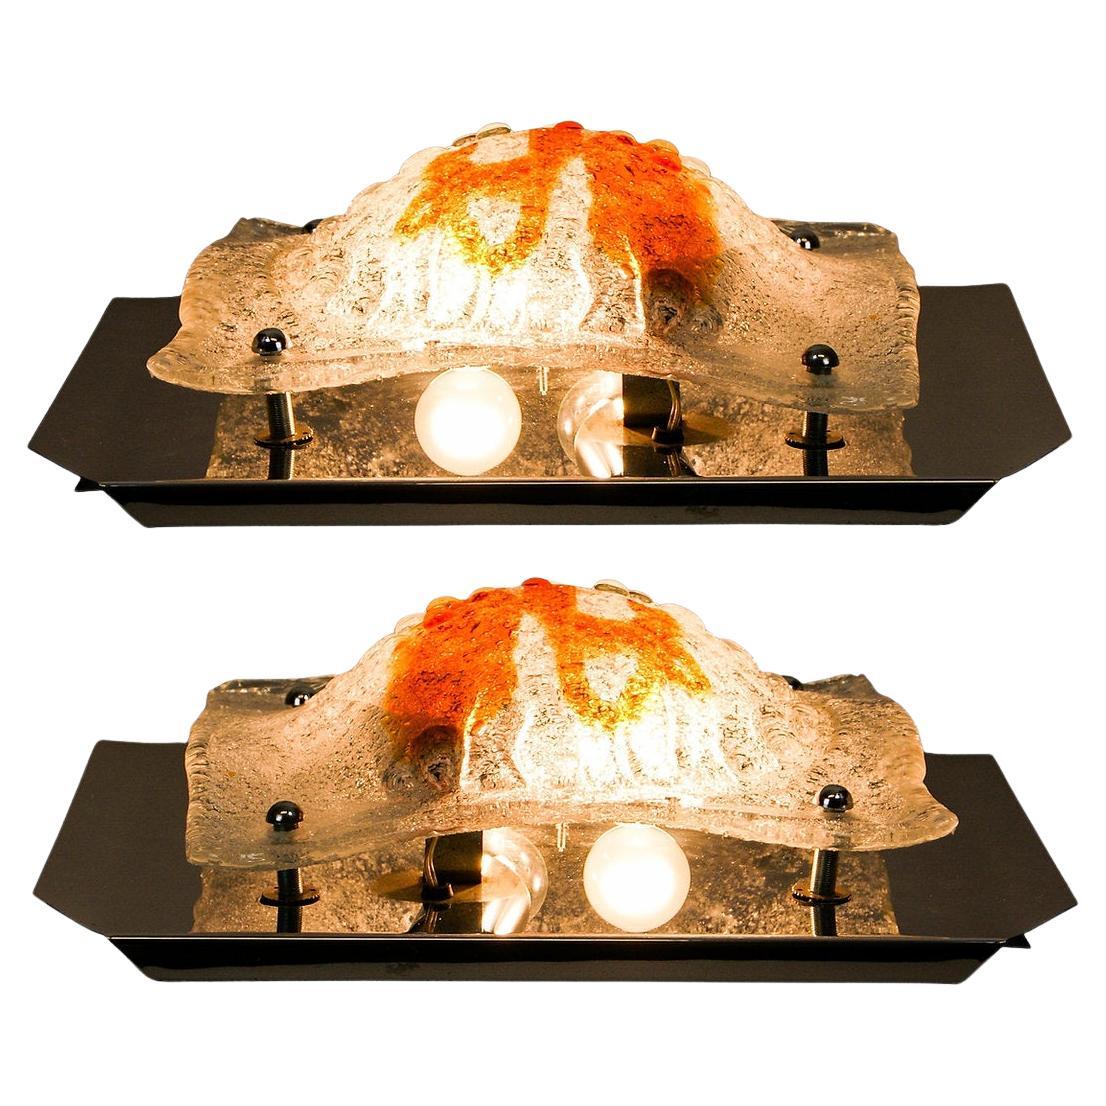 Pair of Amber Glass Bullicante Wall Sconces By Mazzega Murano Toni Zuccheri Attr
Large sized wall lamps from the 1960s.
Blown glass diffusers in clear and amber colour, with a domed and textured bullicante surface.
Set on a polished steel base.
The